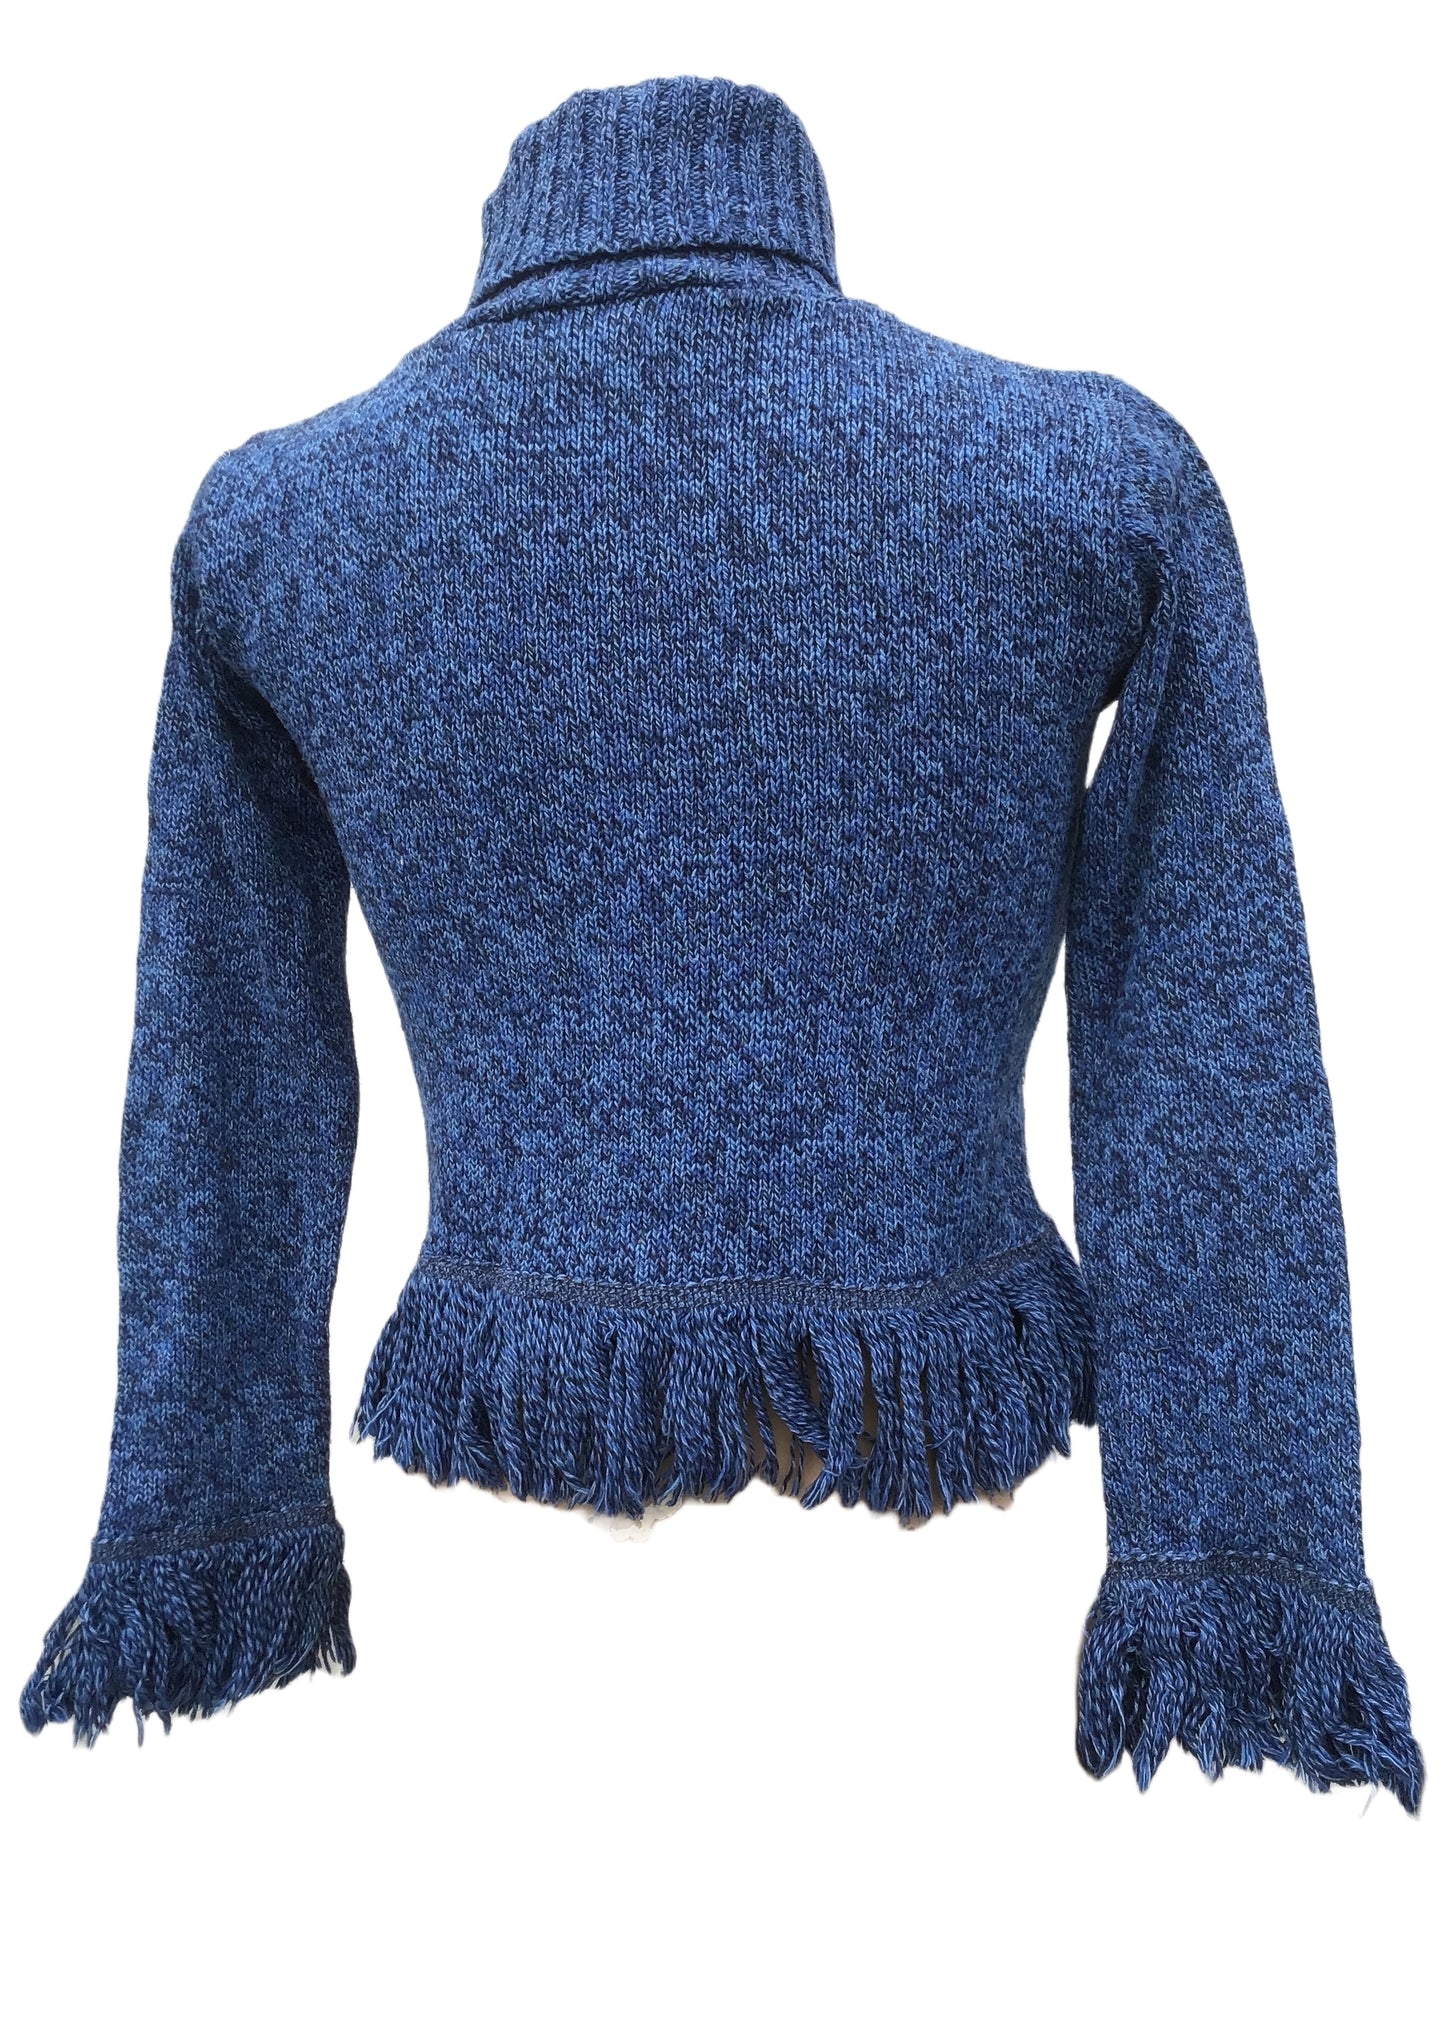 Vintage 90s Blue Cropped Roll Neck Fringed Sweater